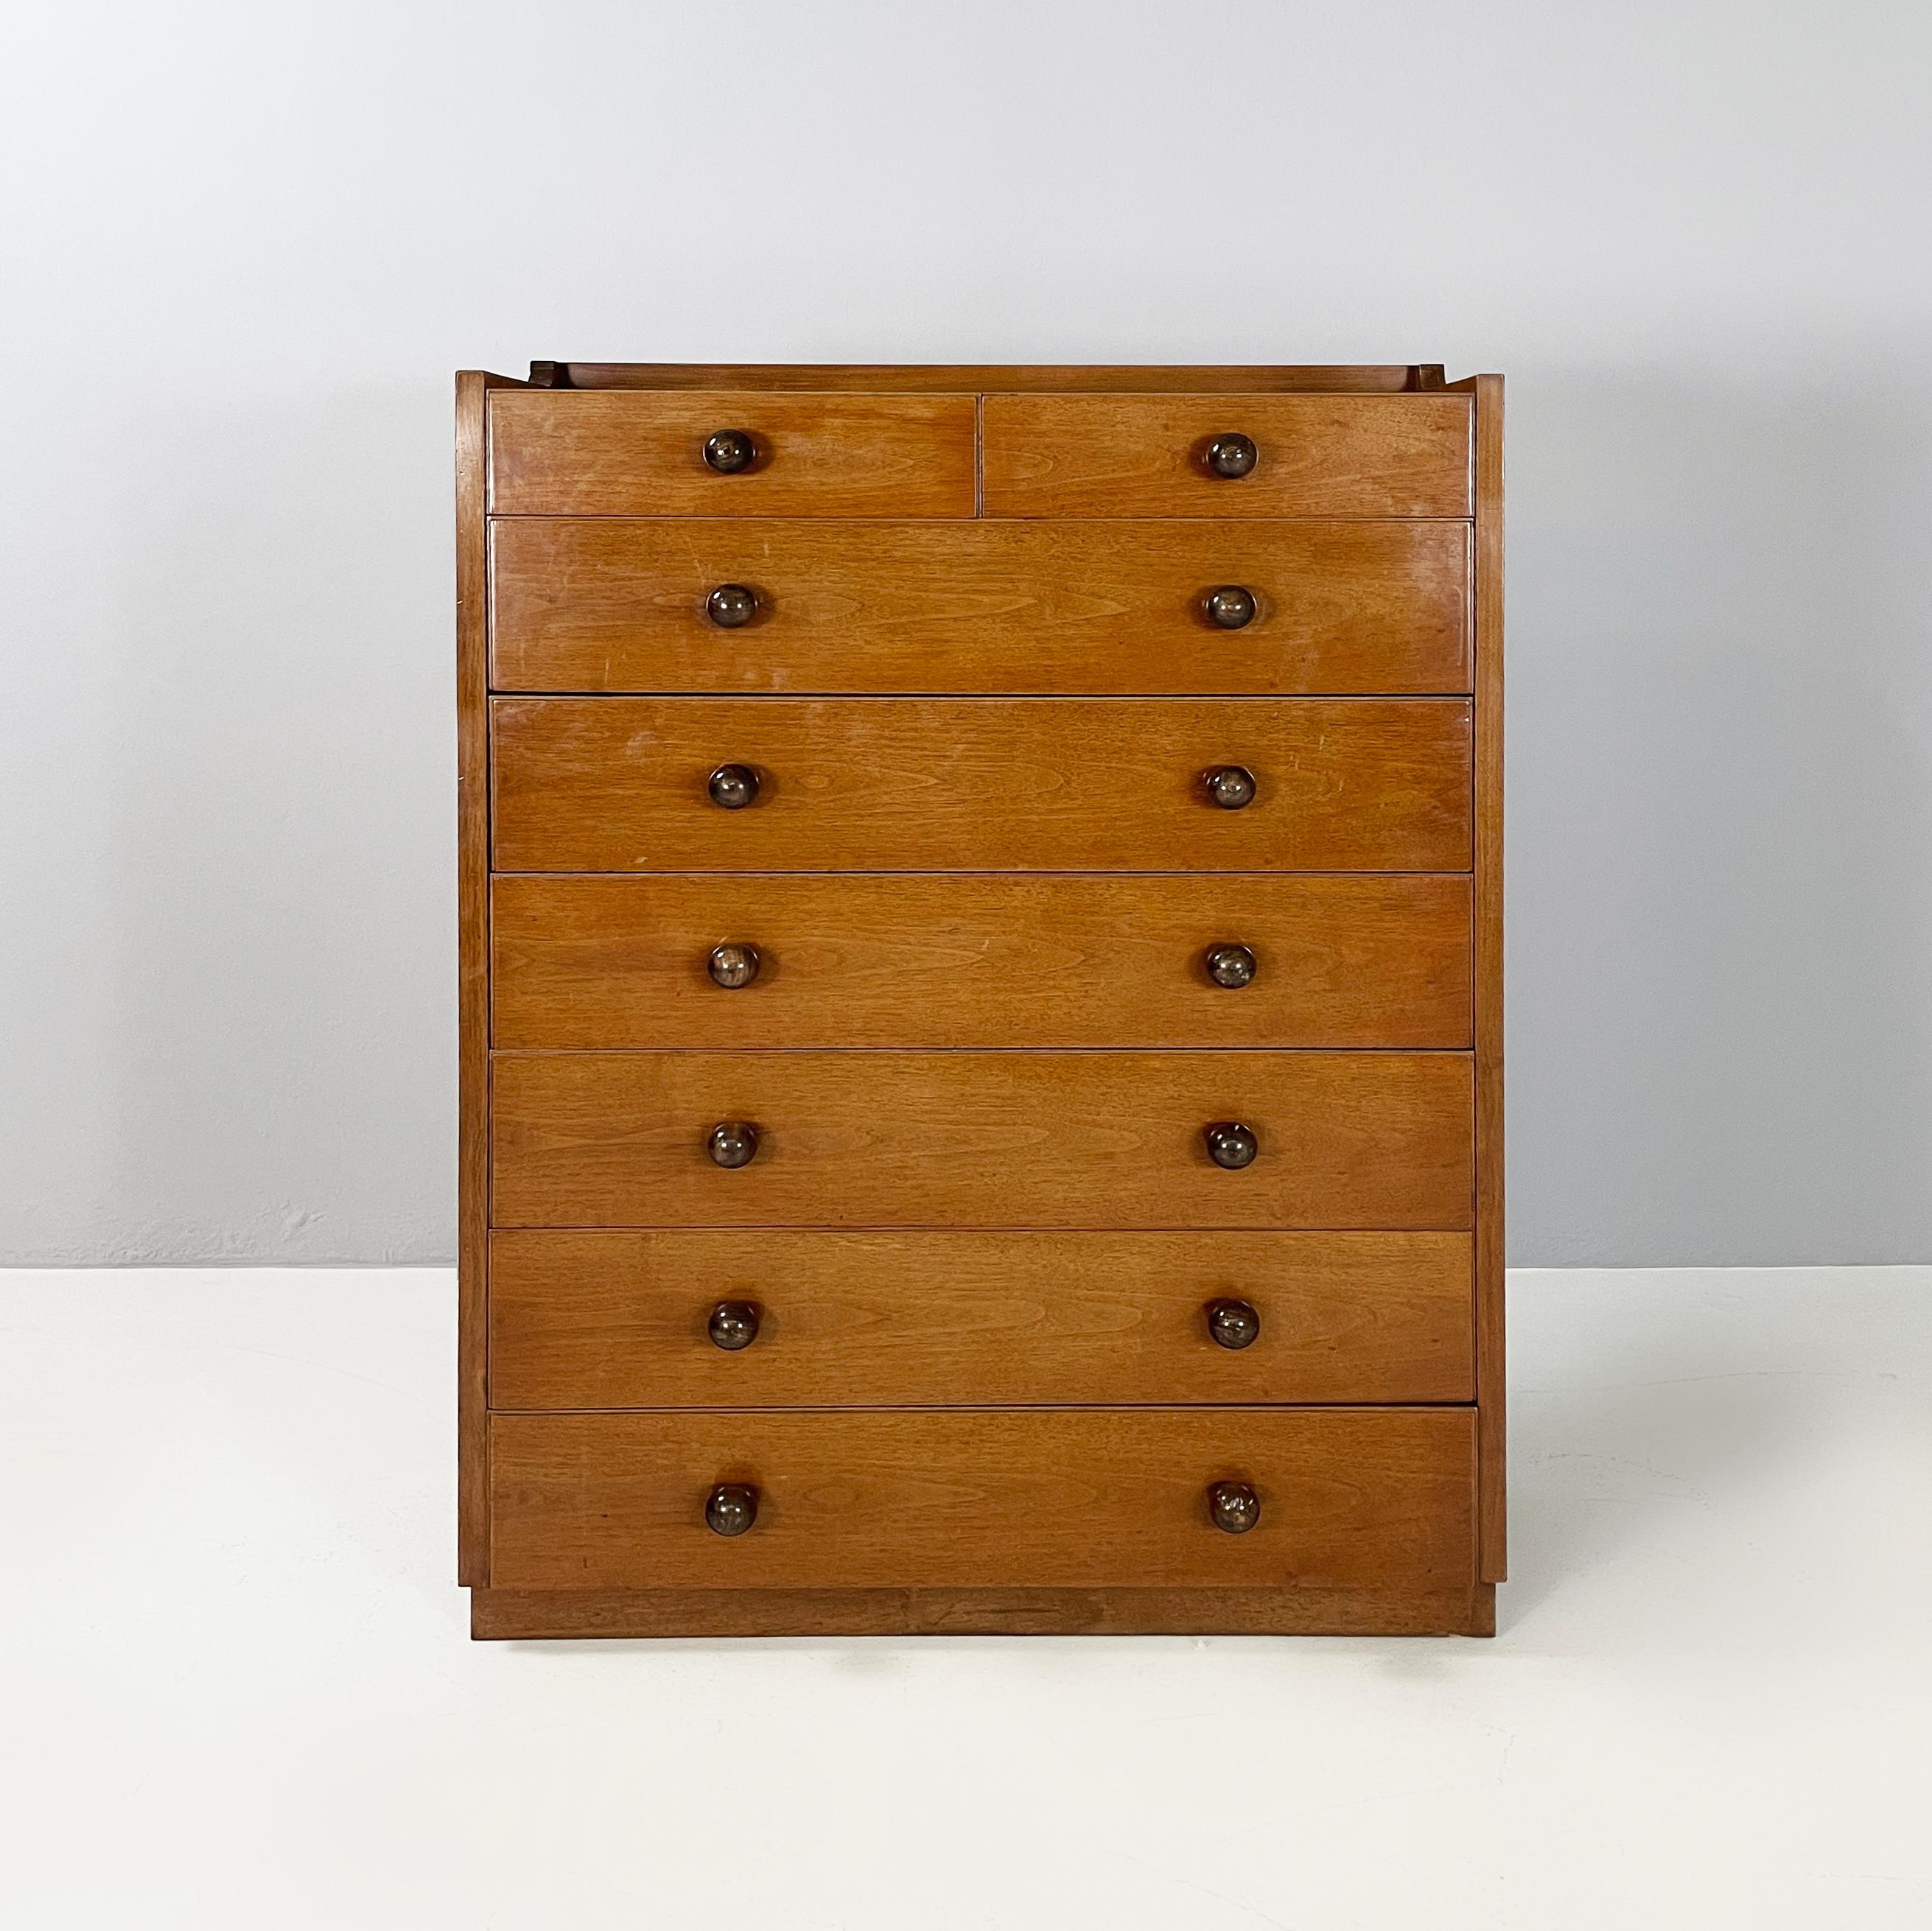 Italian modern Chest of drawers in wood with spherical handle, 1980s
Rectangular chest of drawers entirely made of wood. On the front it has 2 small and 6 large drawers. The handles are spherical.
1980s
Good conditions. Scattered light marks and